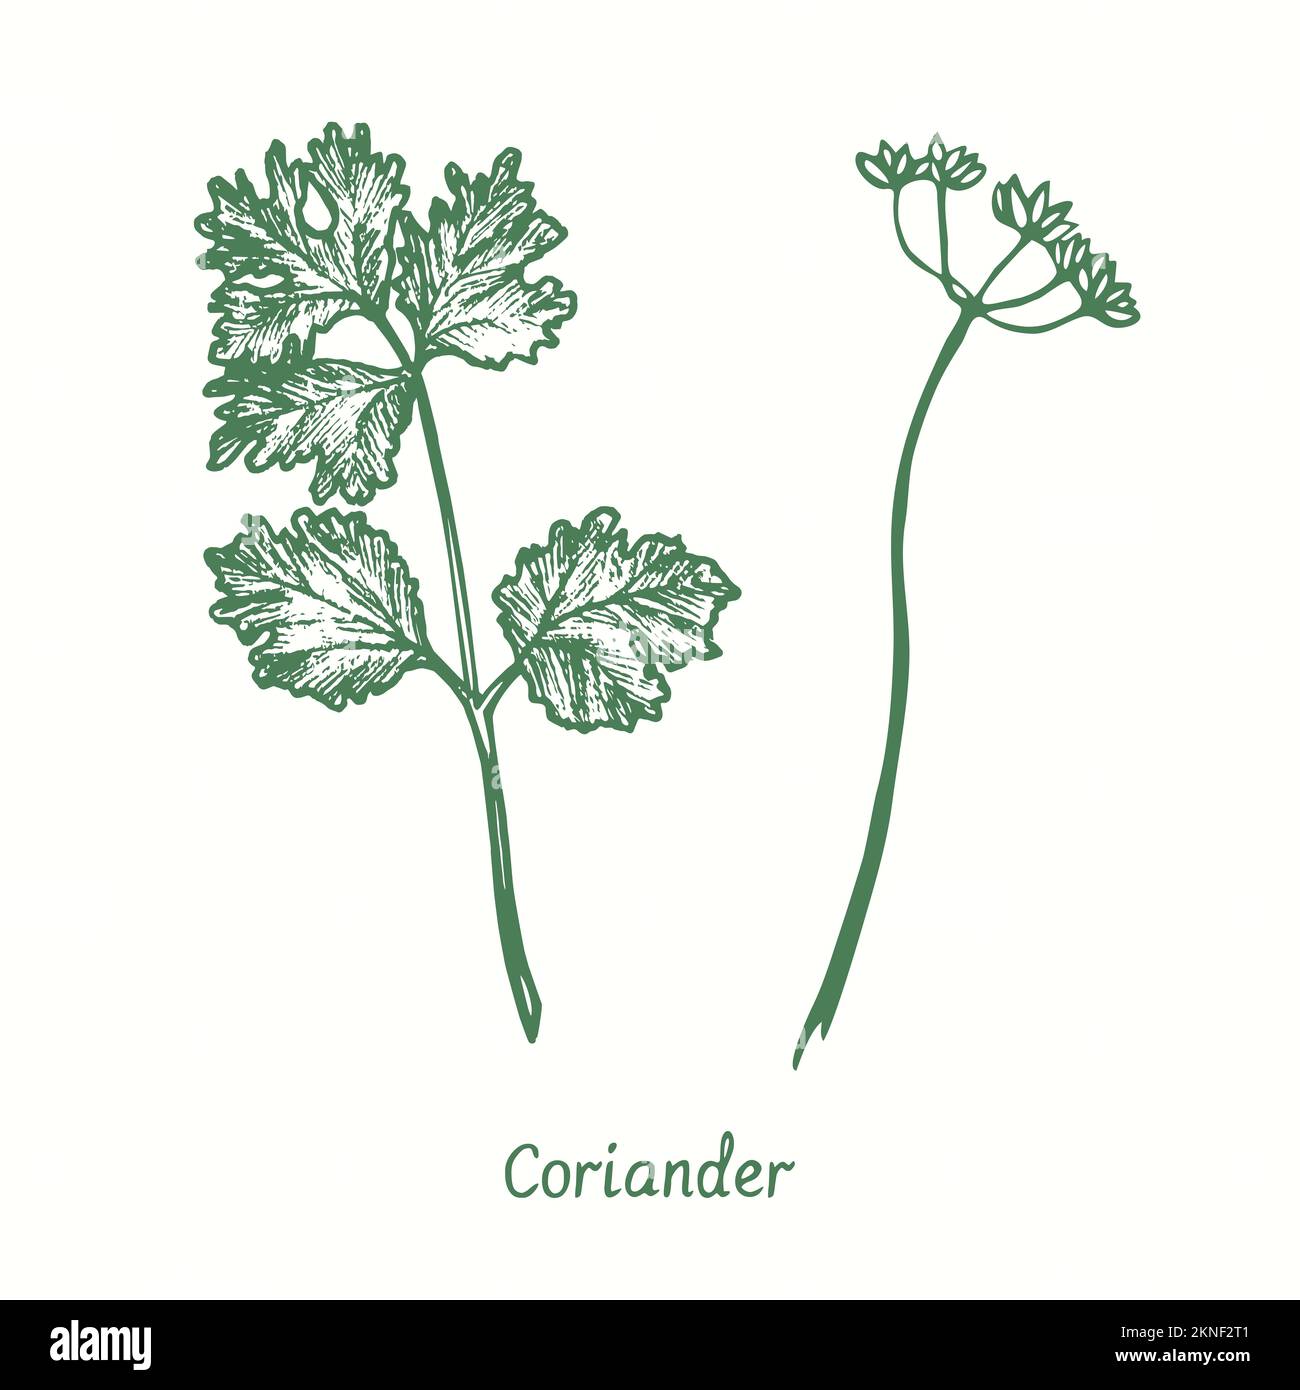 Coriander twig and flower with seeds.  Ink black and white doodle drawing in woodcut style Stock Photo